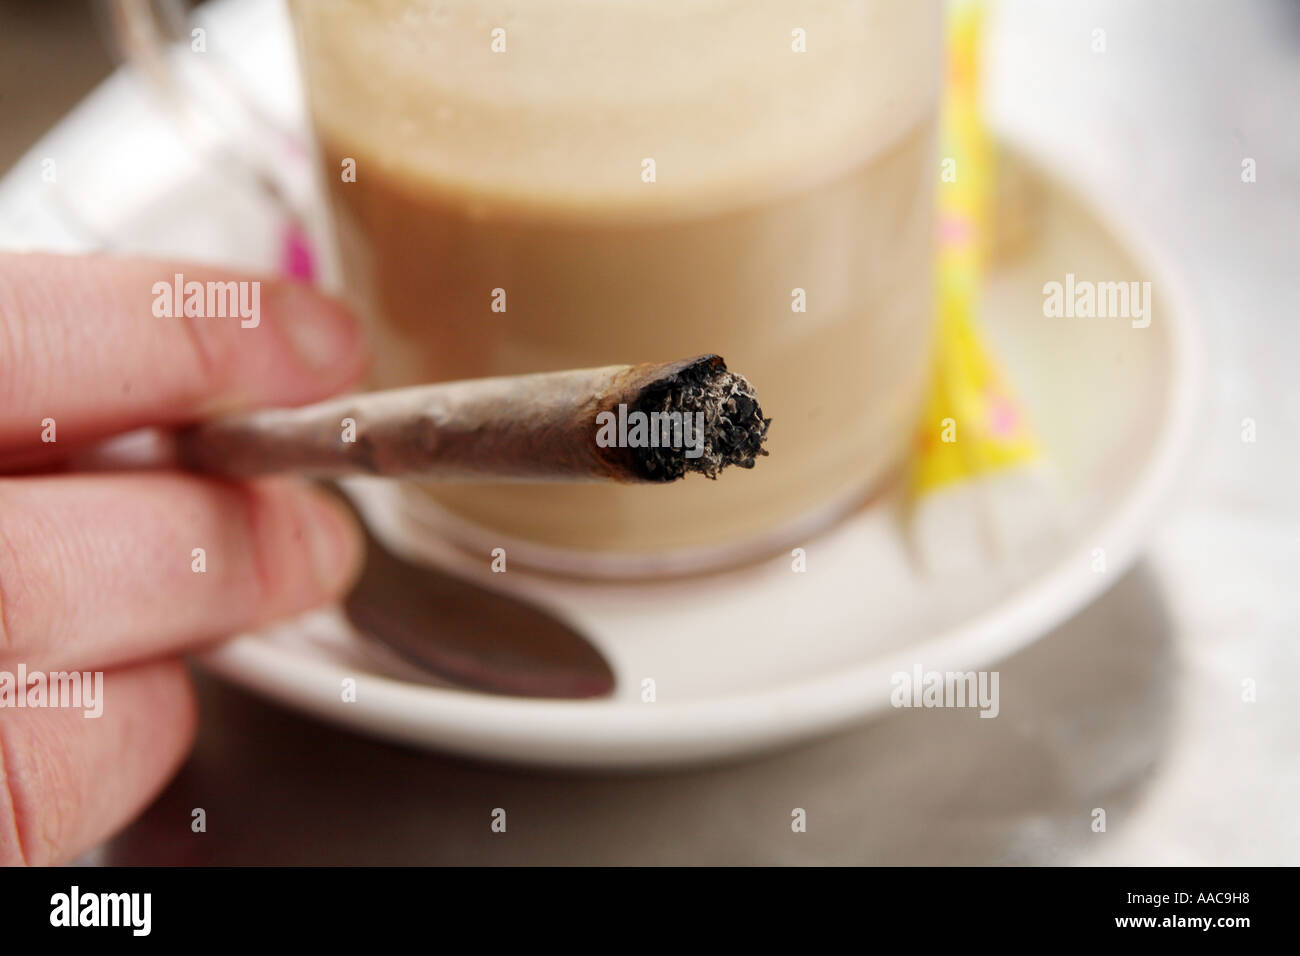 young woman smoking marijuana in a coffee shop in holland, hand close up Stock Photo